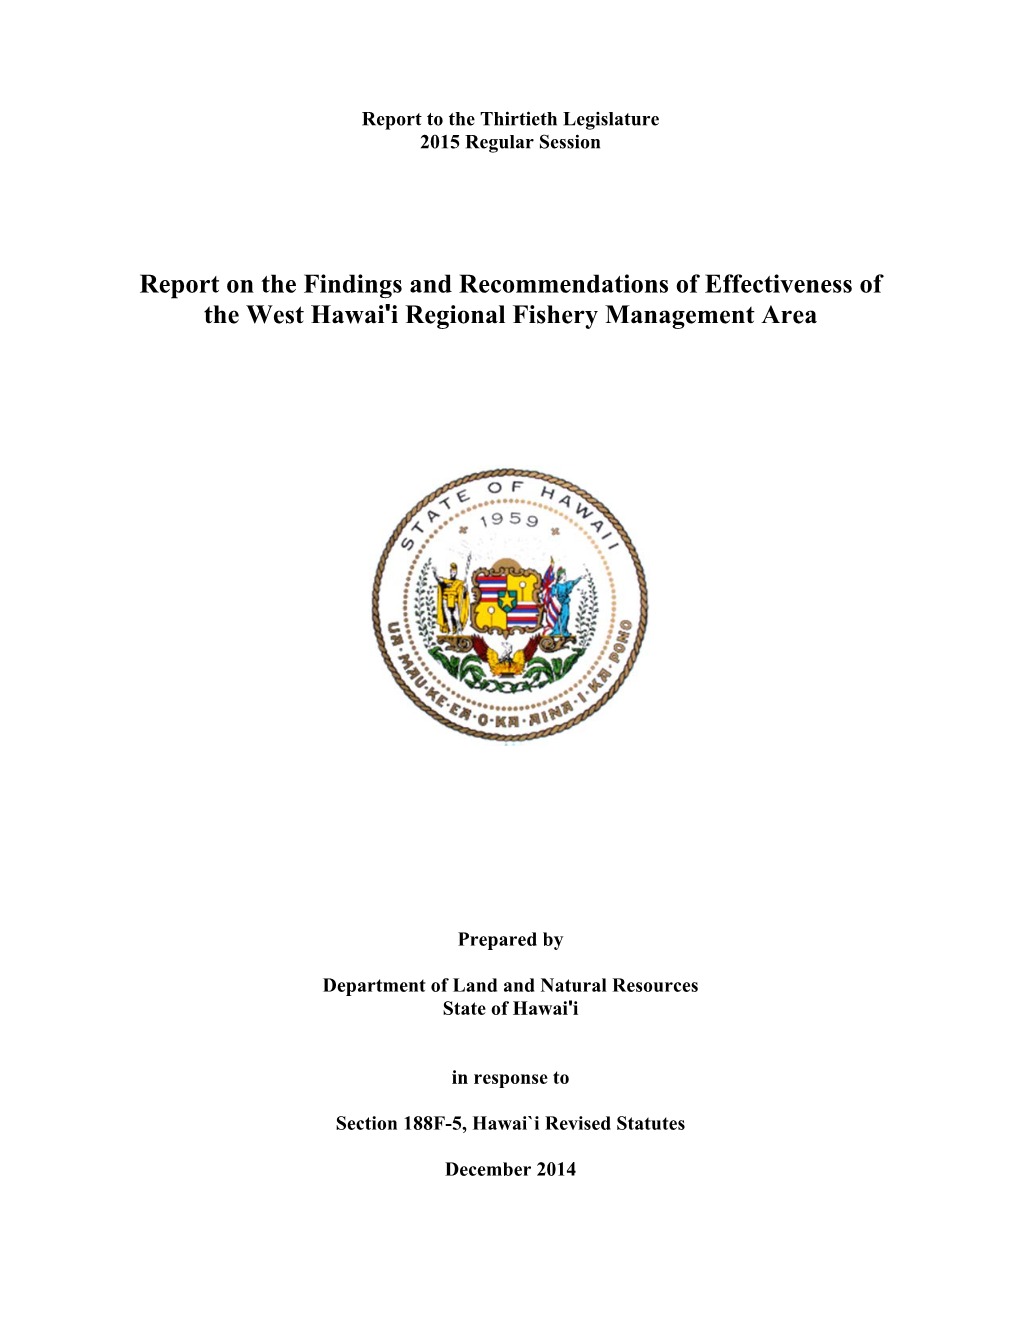 Report on the Findings and Recommendations of Effectiveness of the West Hawai'i Regional Fishery Management Area